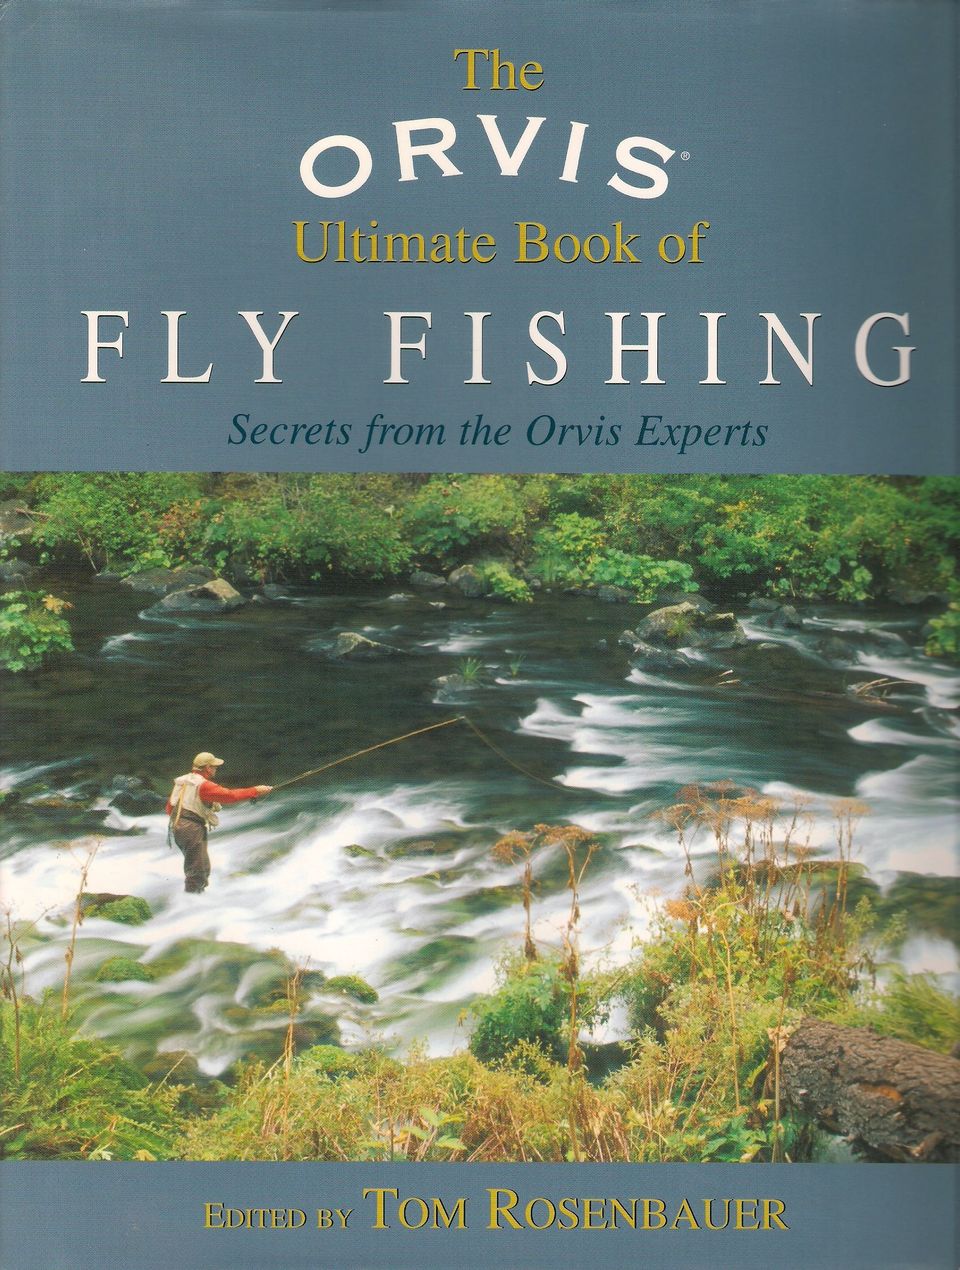 THE ORVIS ULTIMATE BOOK OF FLY FISHING